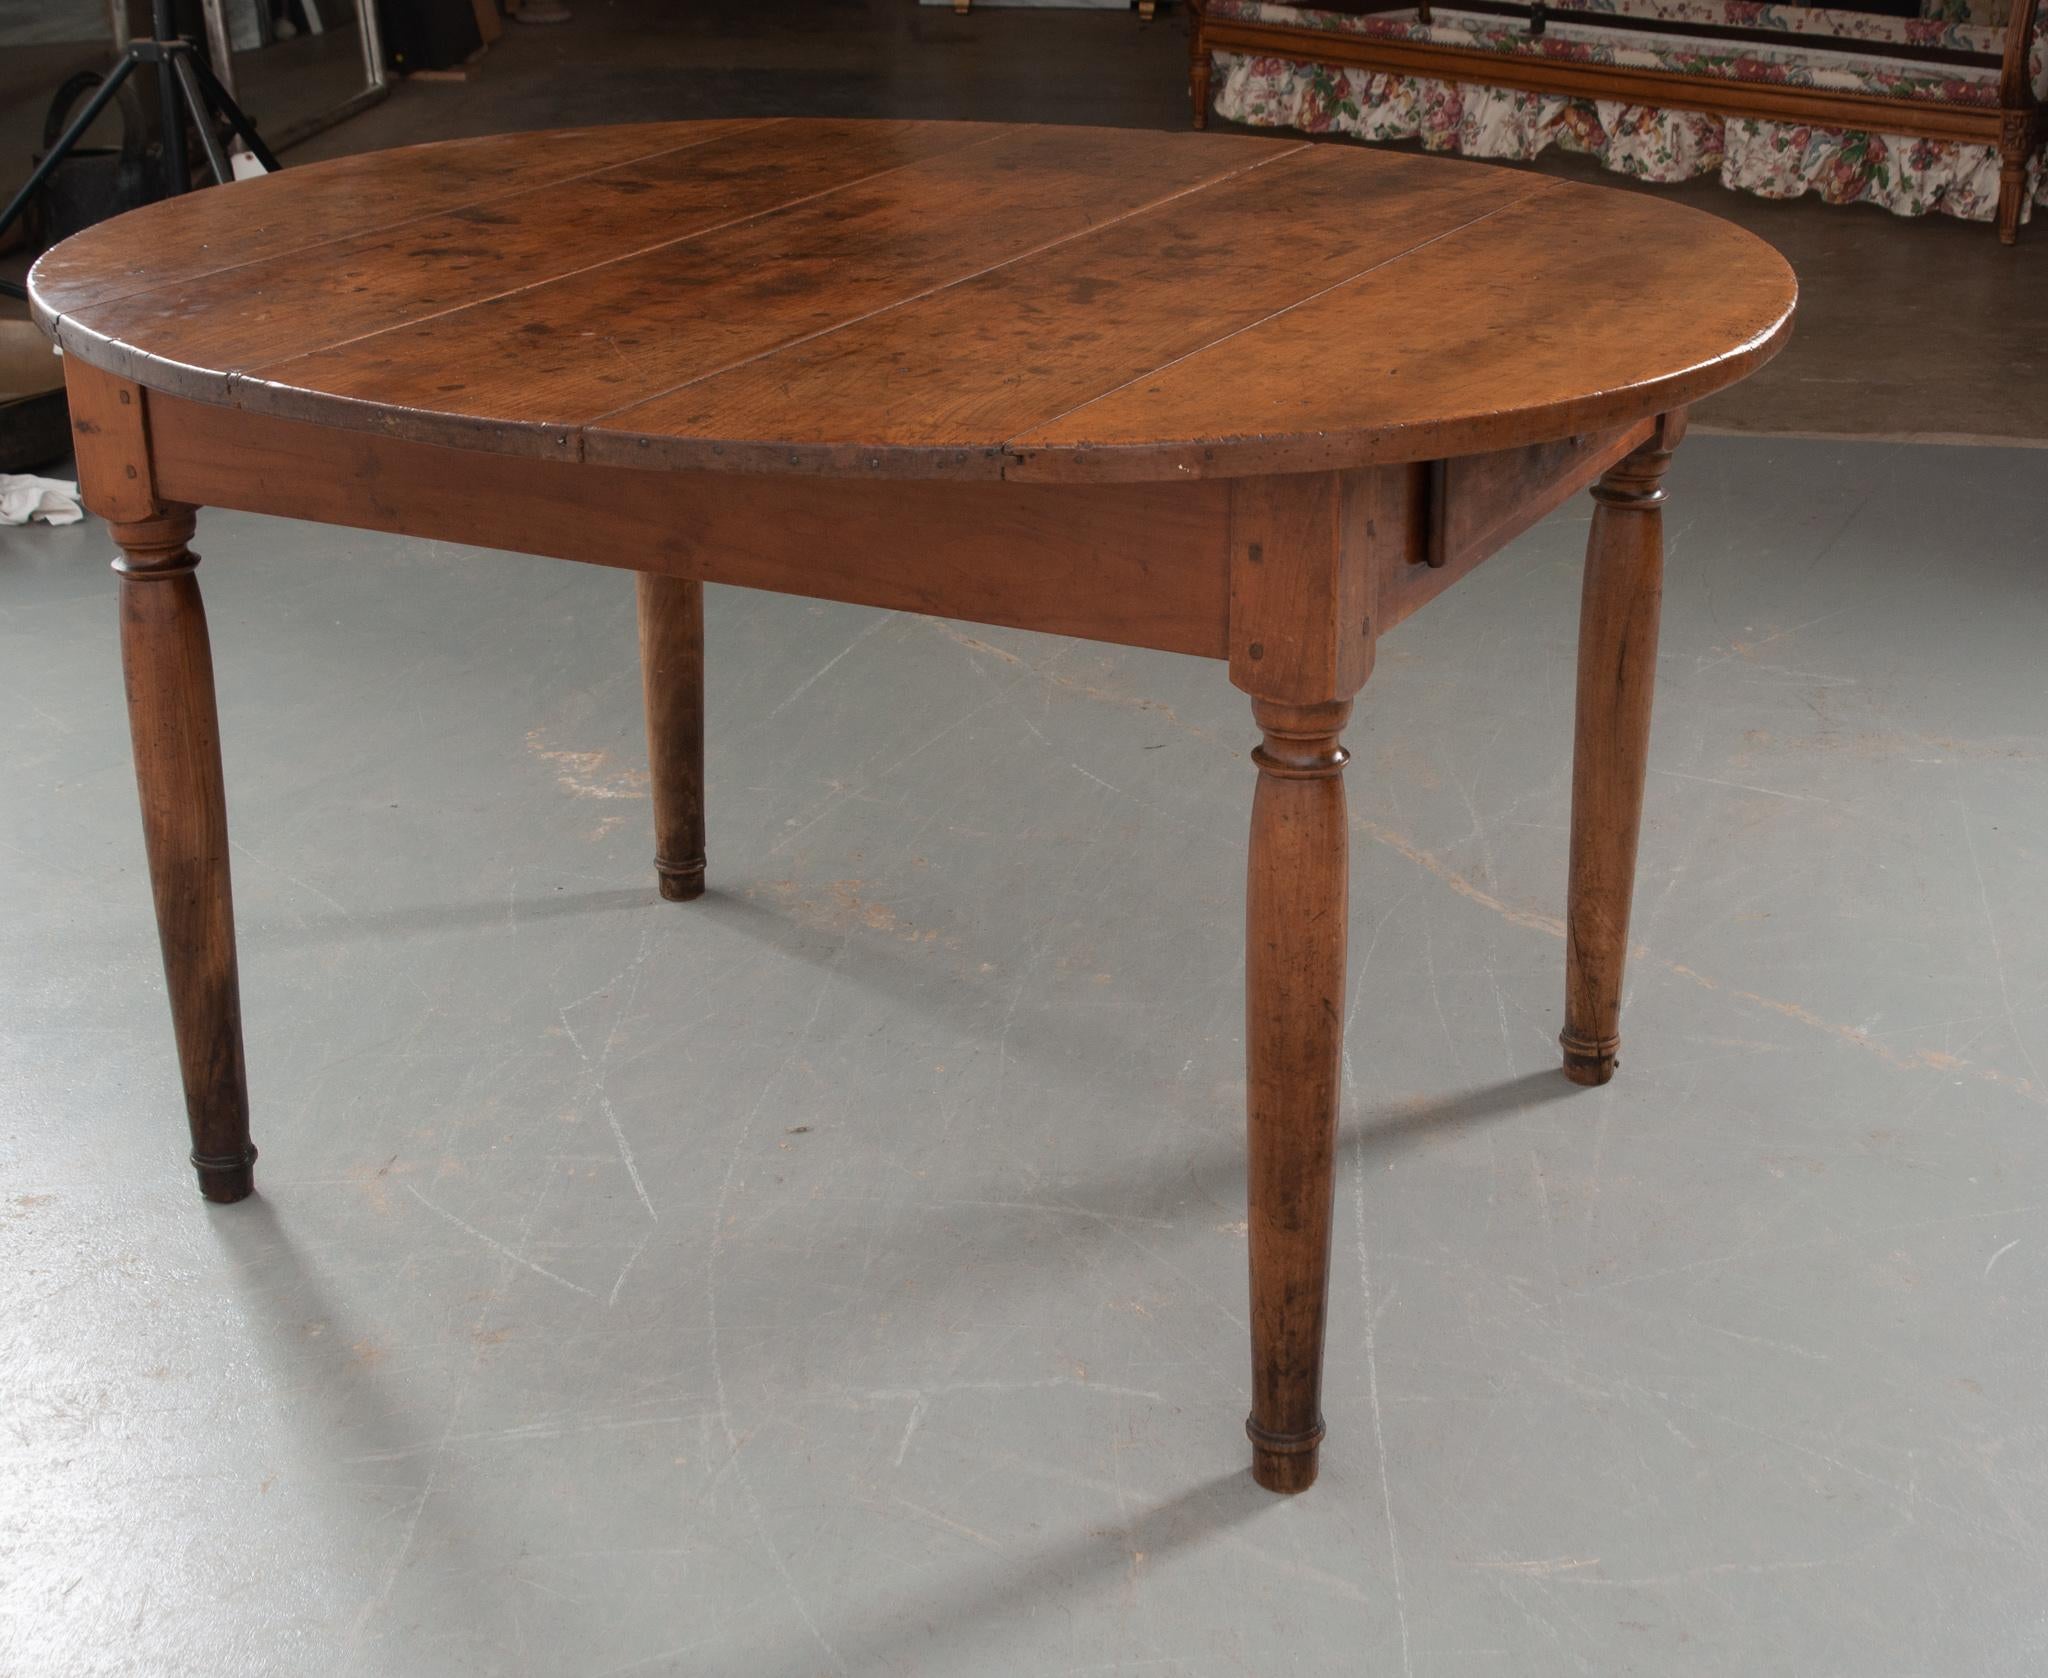 French 19th Century solid walnut oval dining table. This wonderful table features a drawer housed within its apron and four beautifully turned legs. This table would be perfect for a breakfast room or smaller dining area!